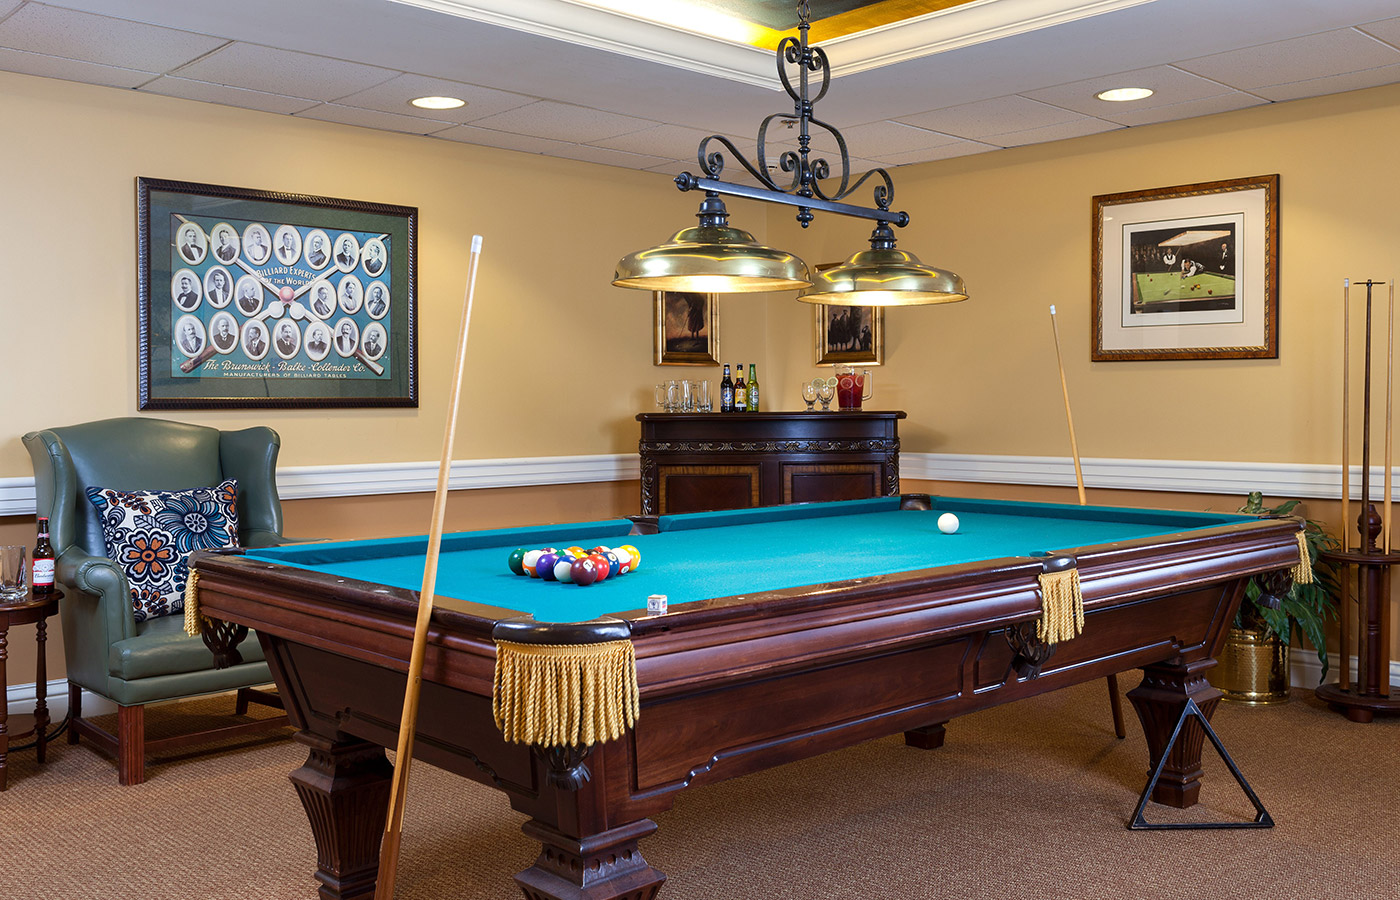 Game room with pool table.